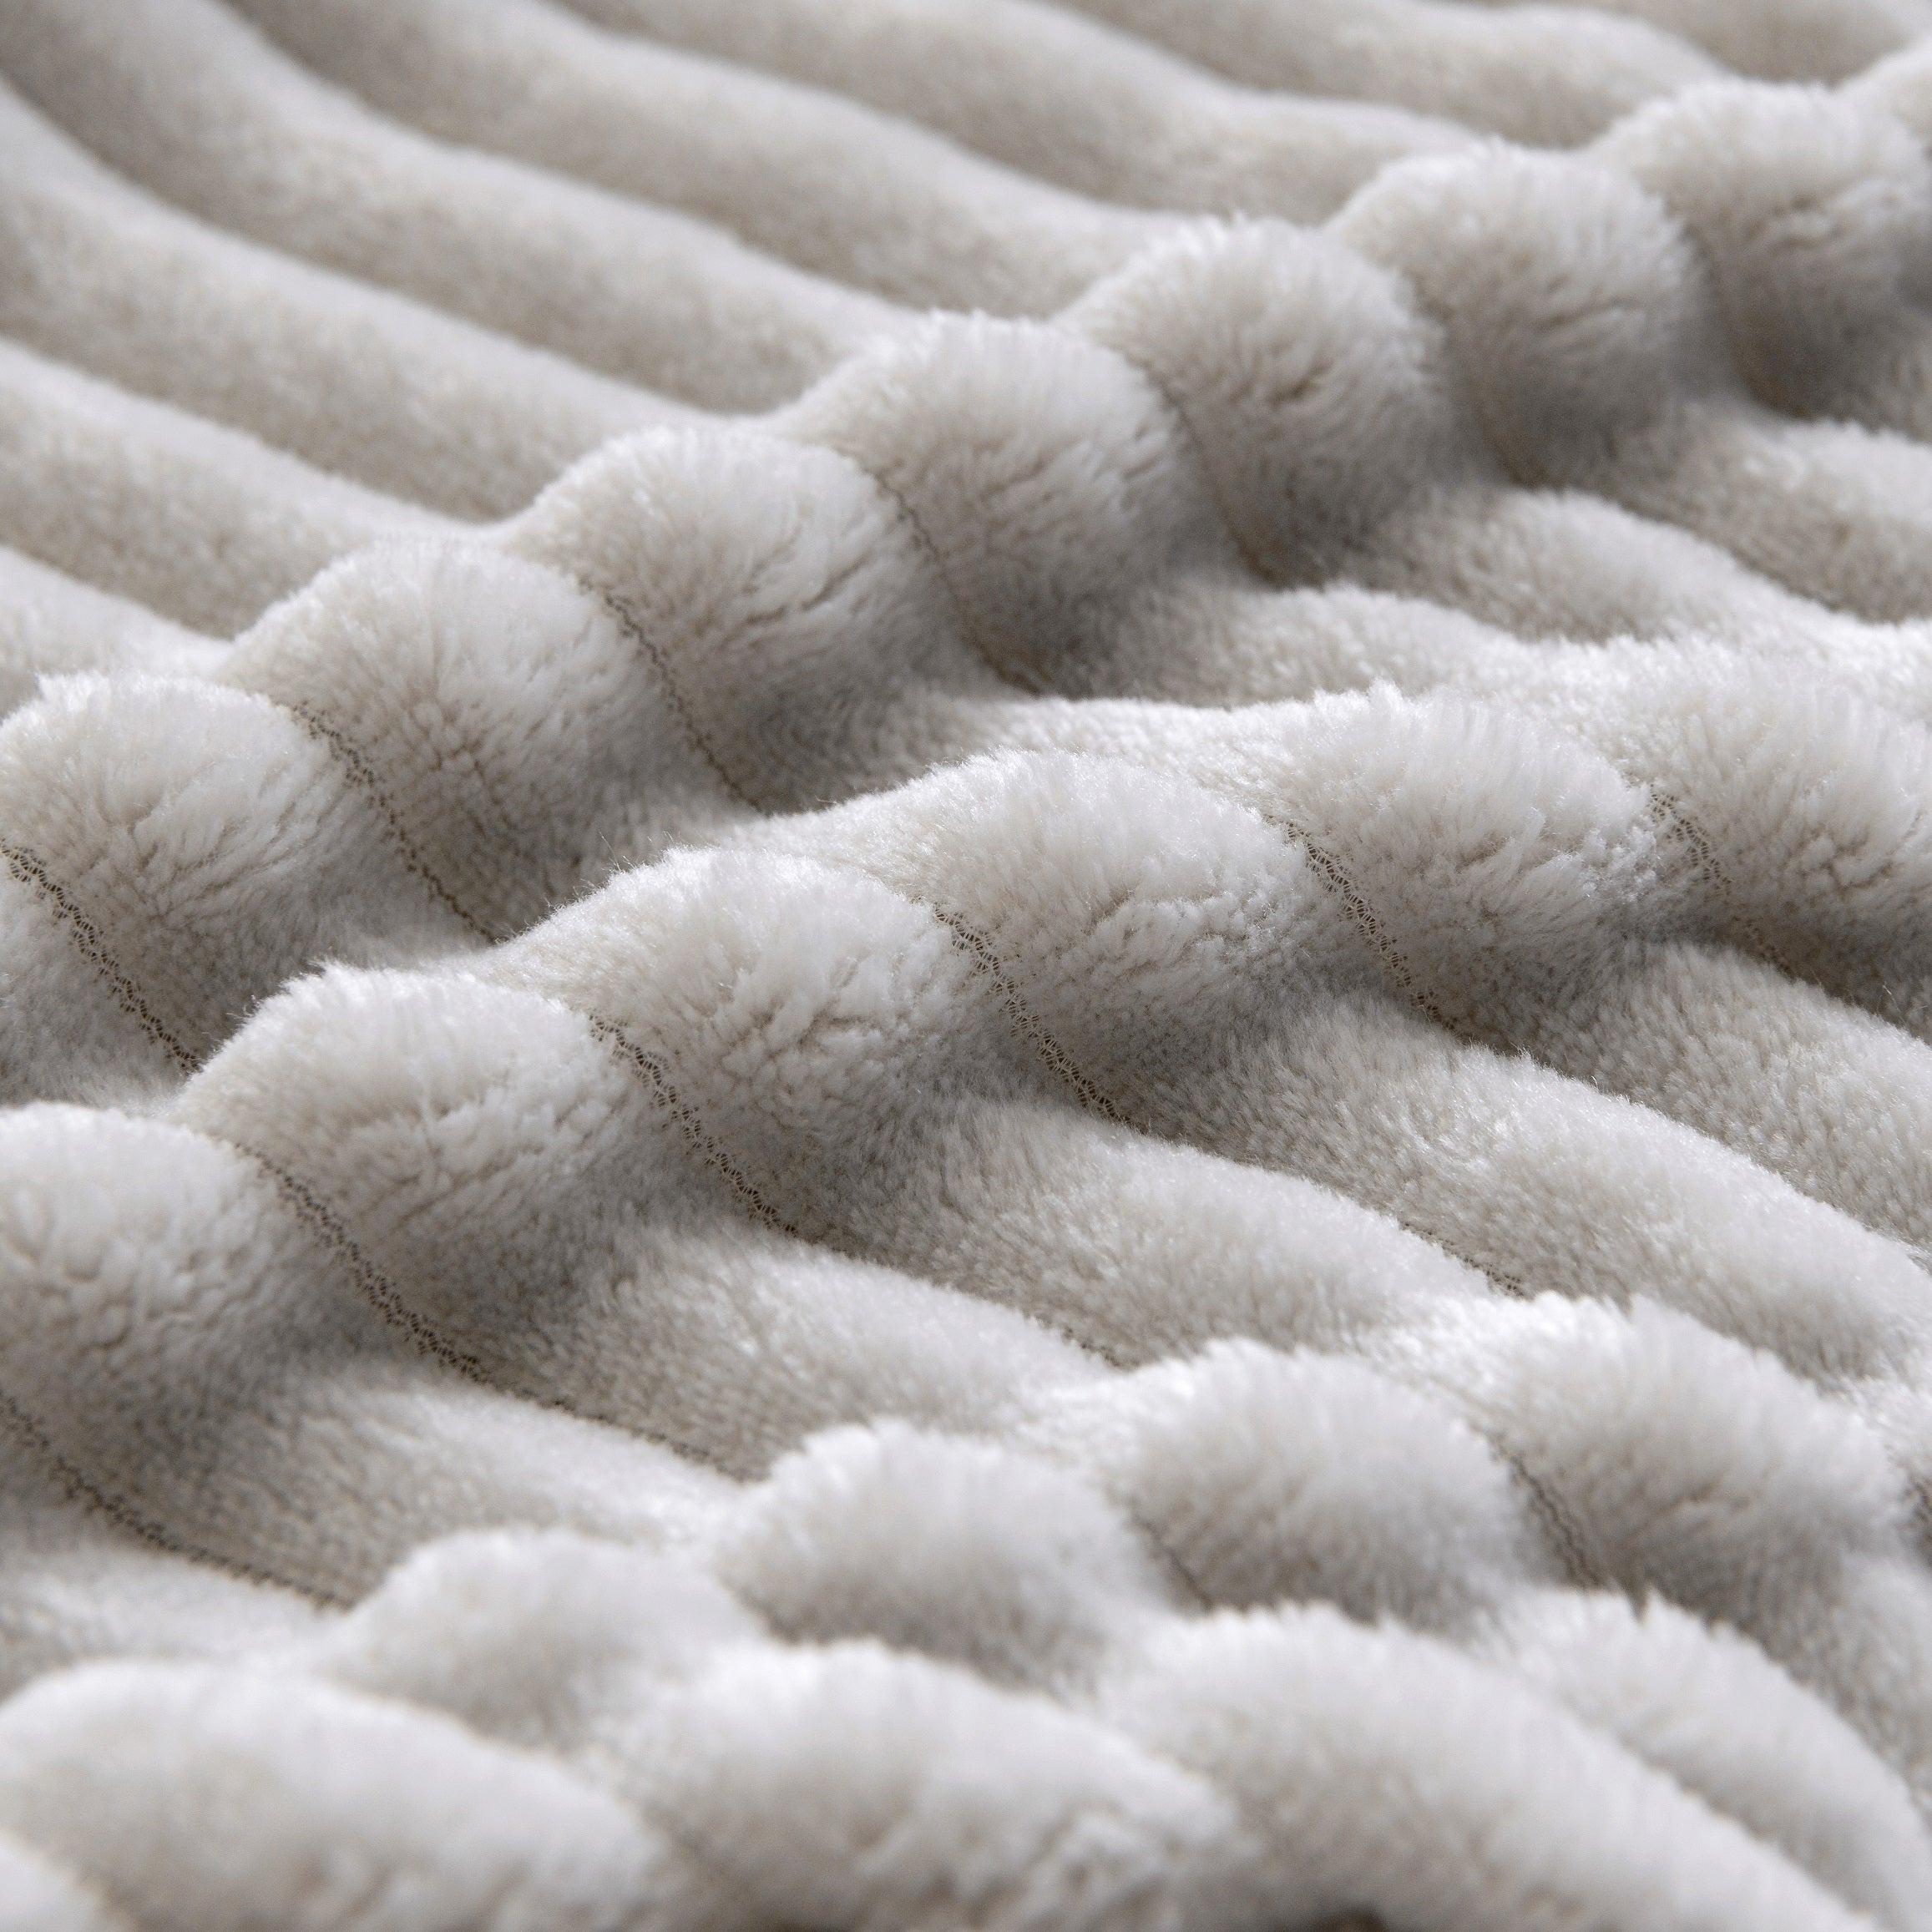 Solid Plush Ribbed Blanket - Ultra Soft and Smooth